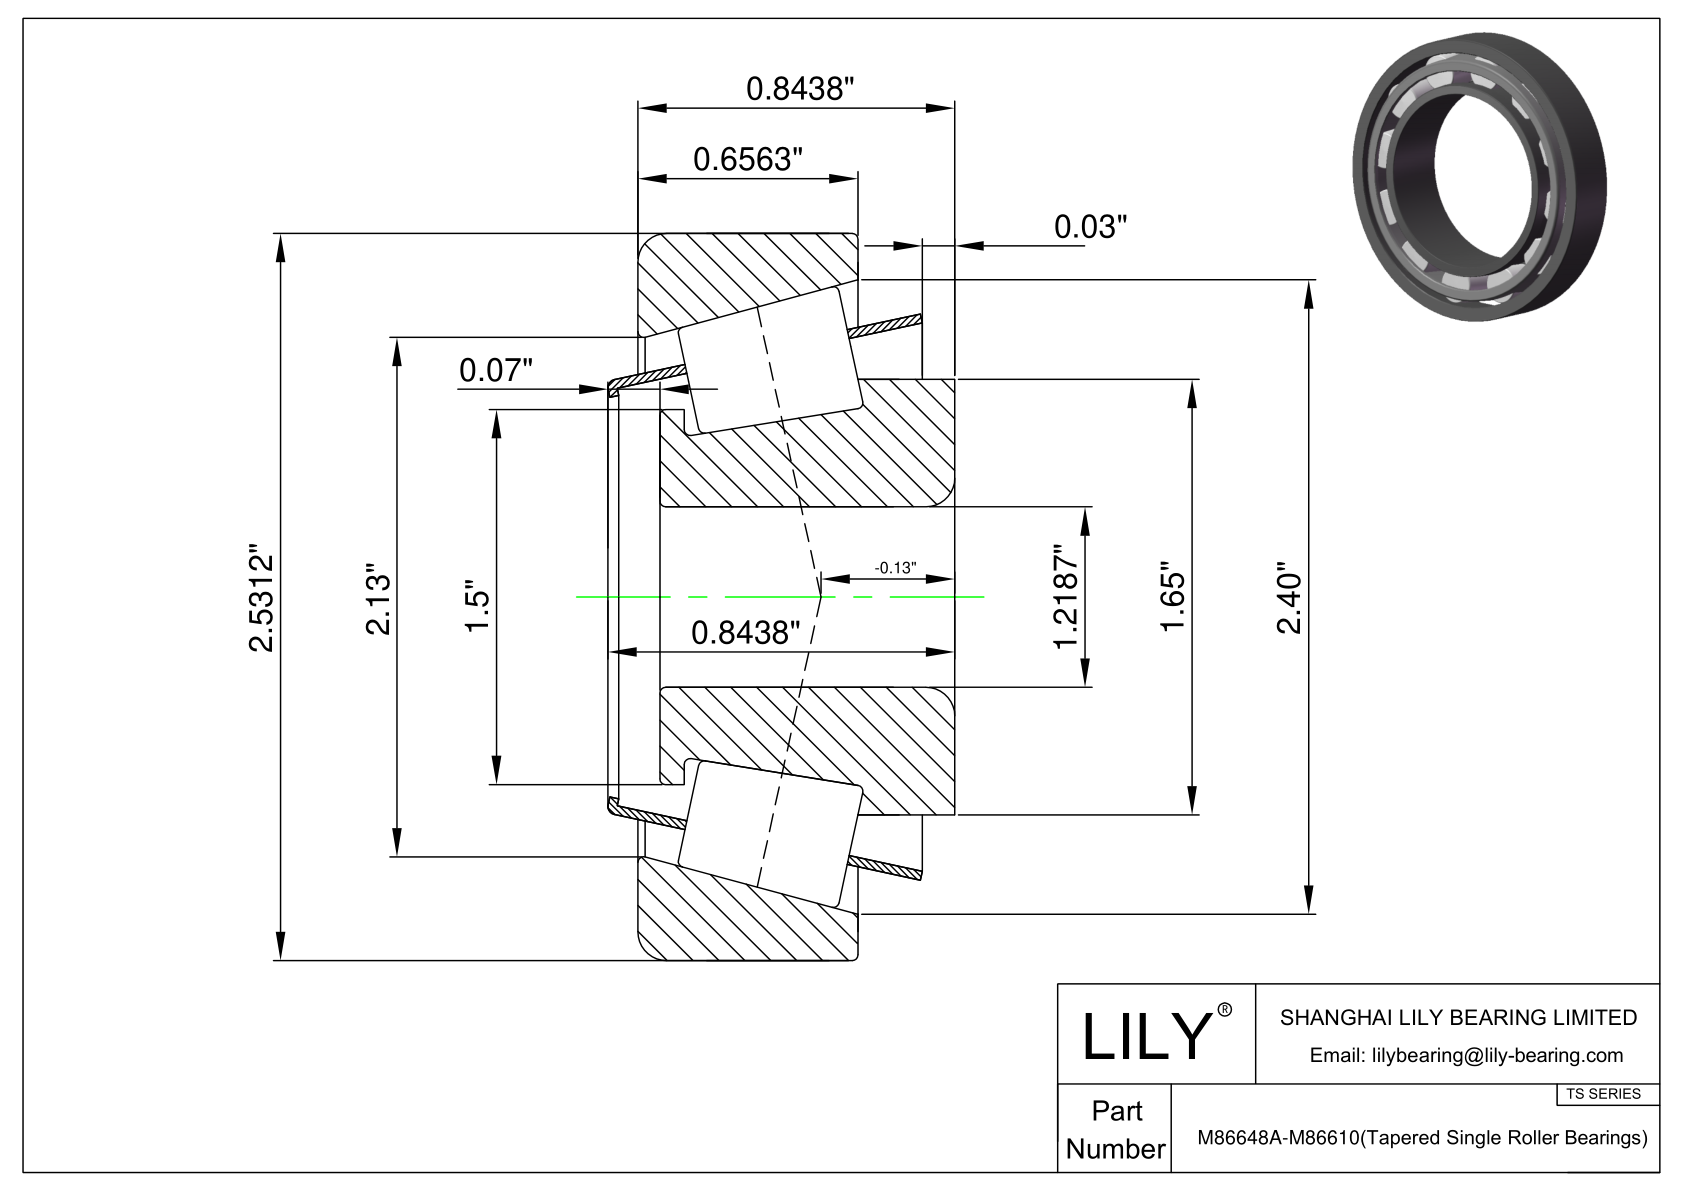 M86648A-M86610 TS (Tapered Single Roller Bearings) (Imperial) cad drawing